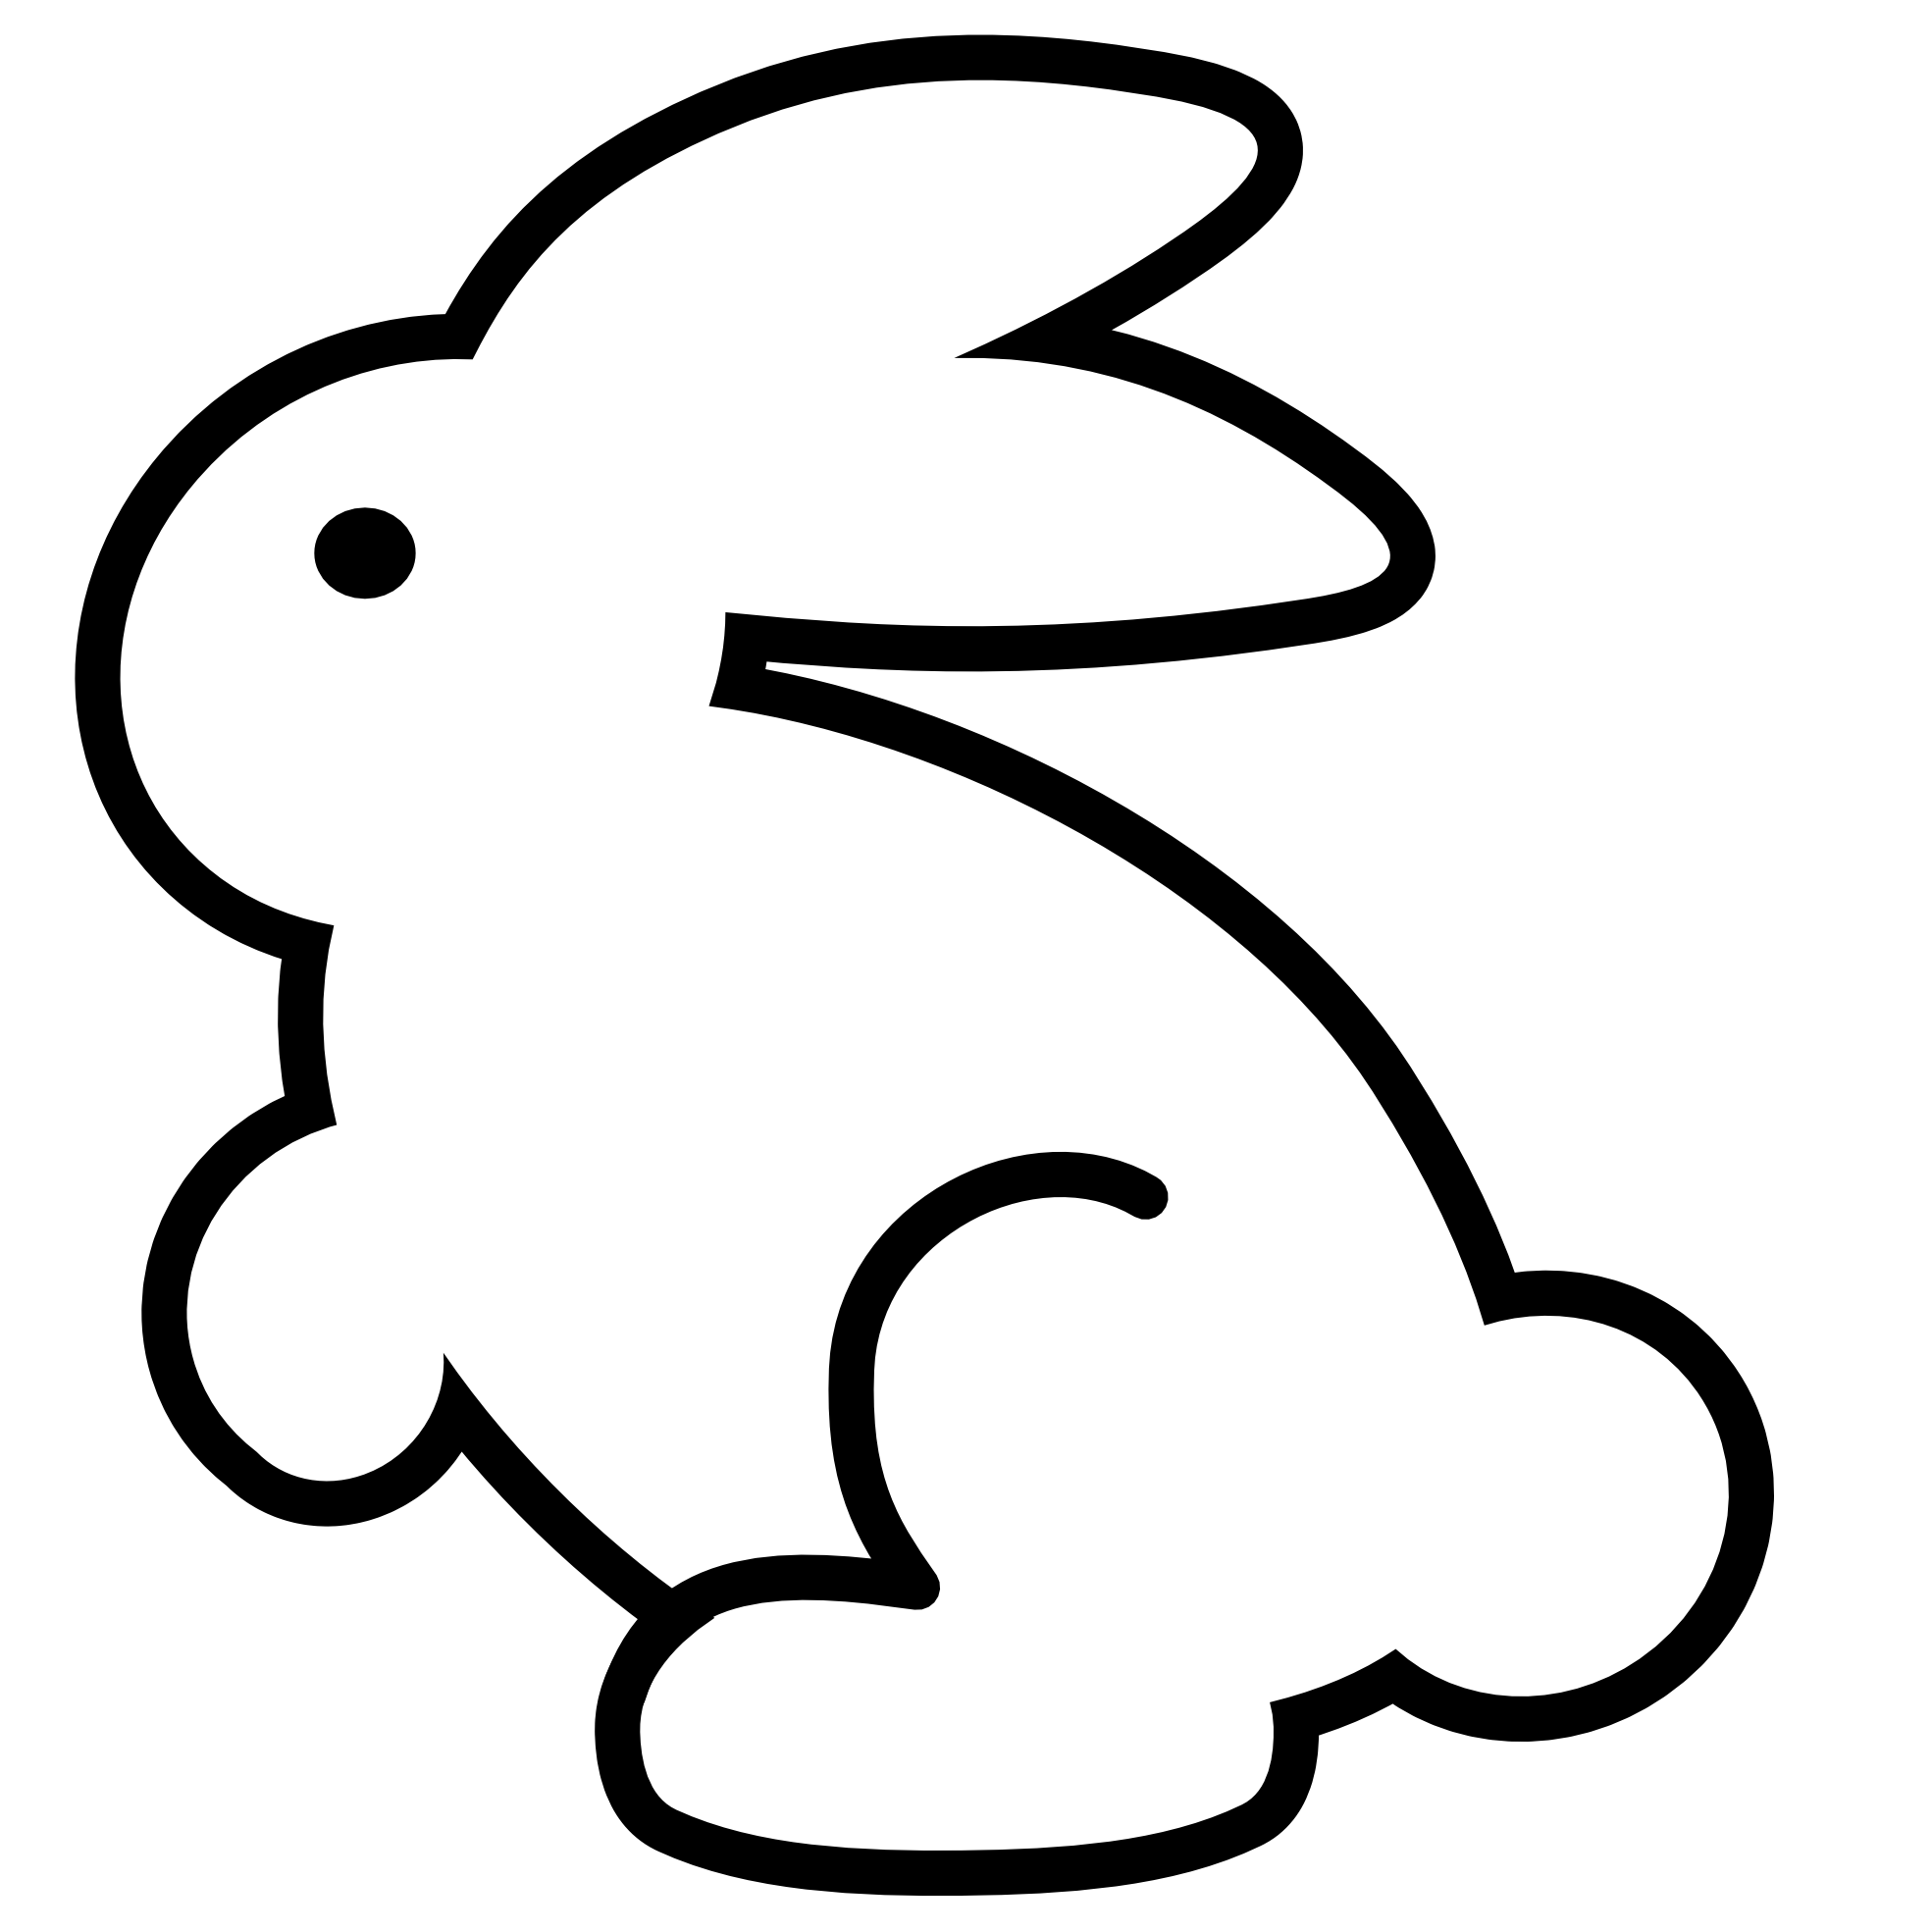 Bunny panda free images. Penny clipart black and white